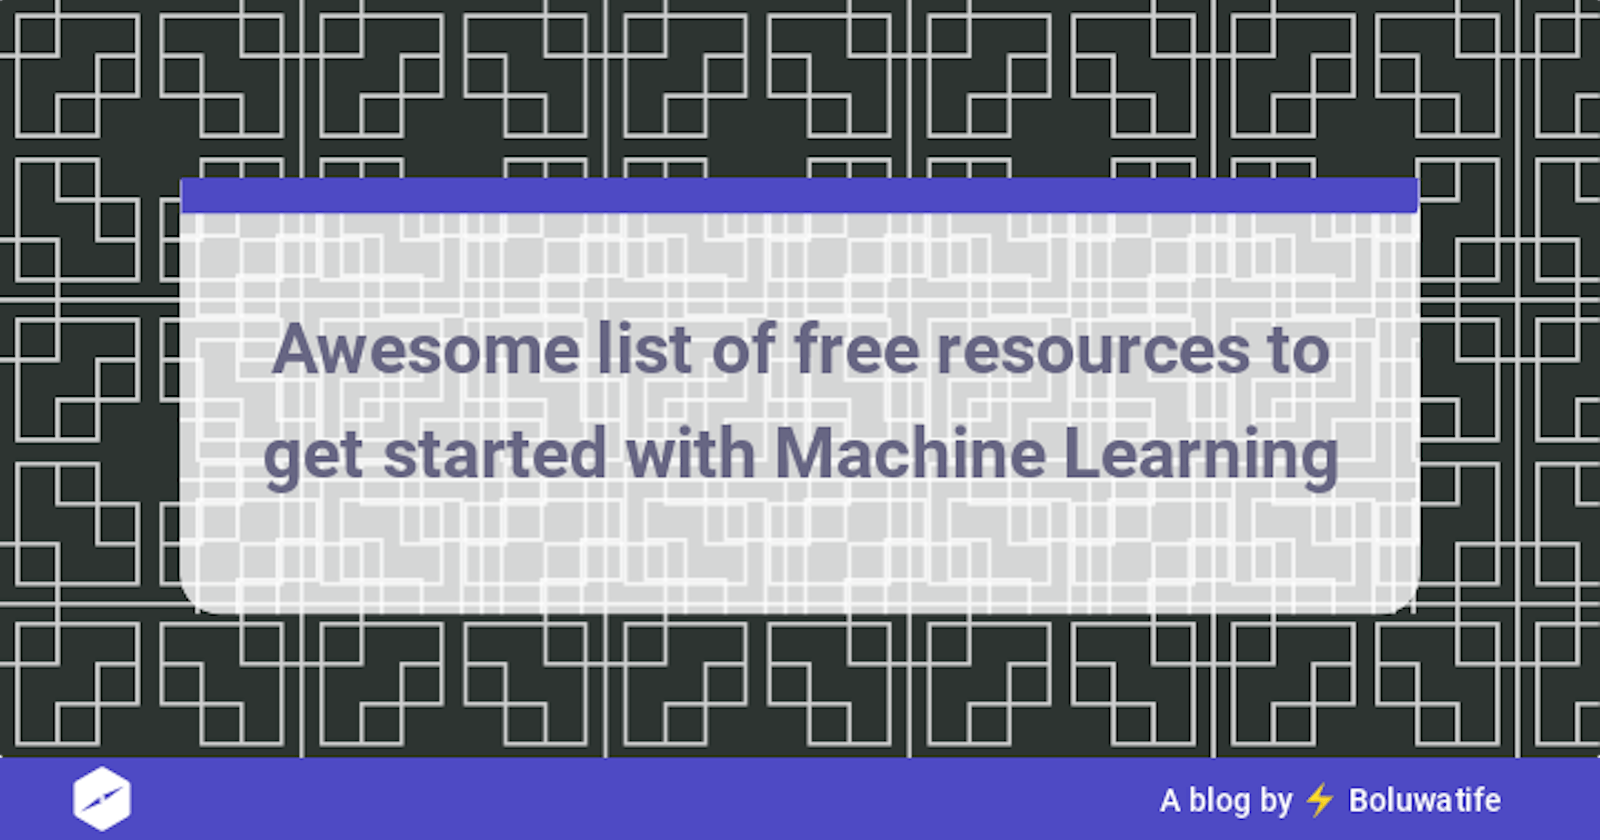 Awesome list of free resources to get started with Machine Learning